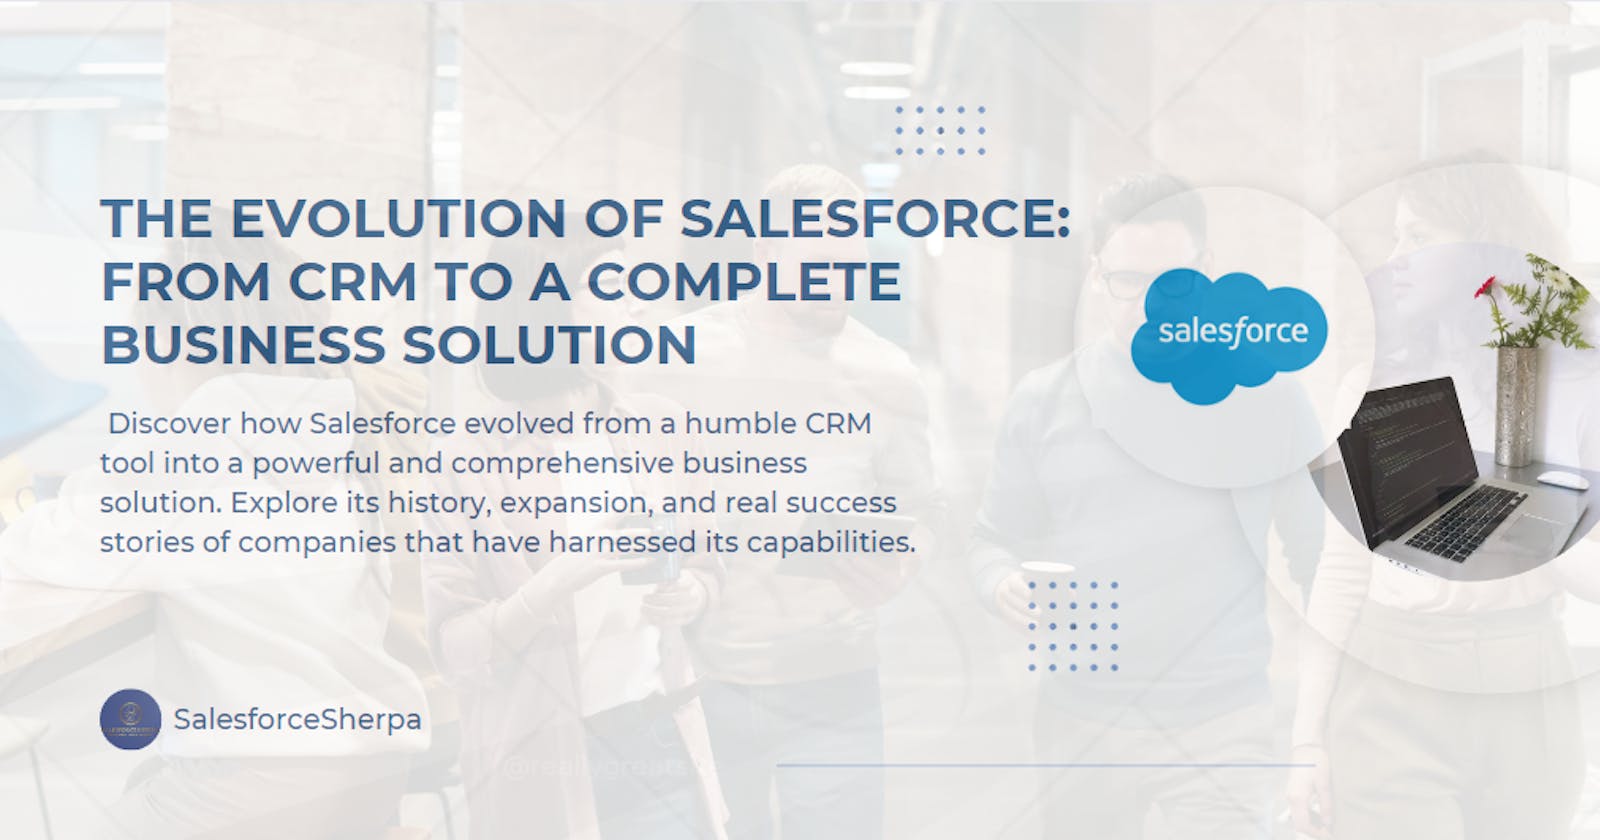 The Evolution of Salesforce: From CRM to a Complete Business Solution